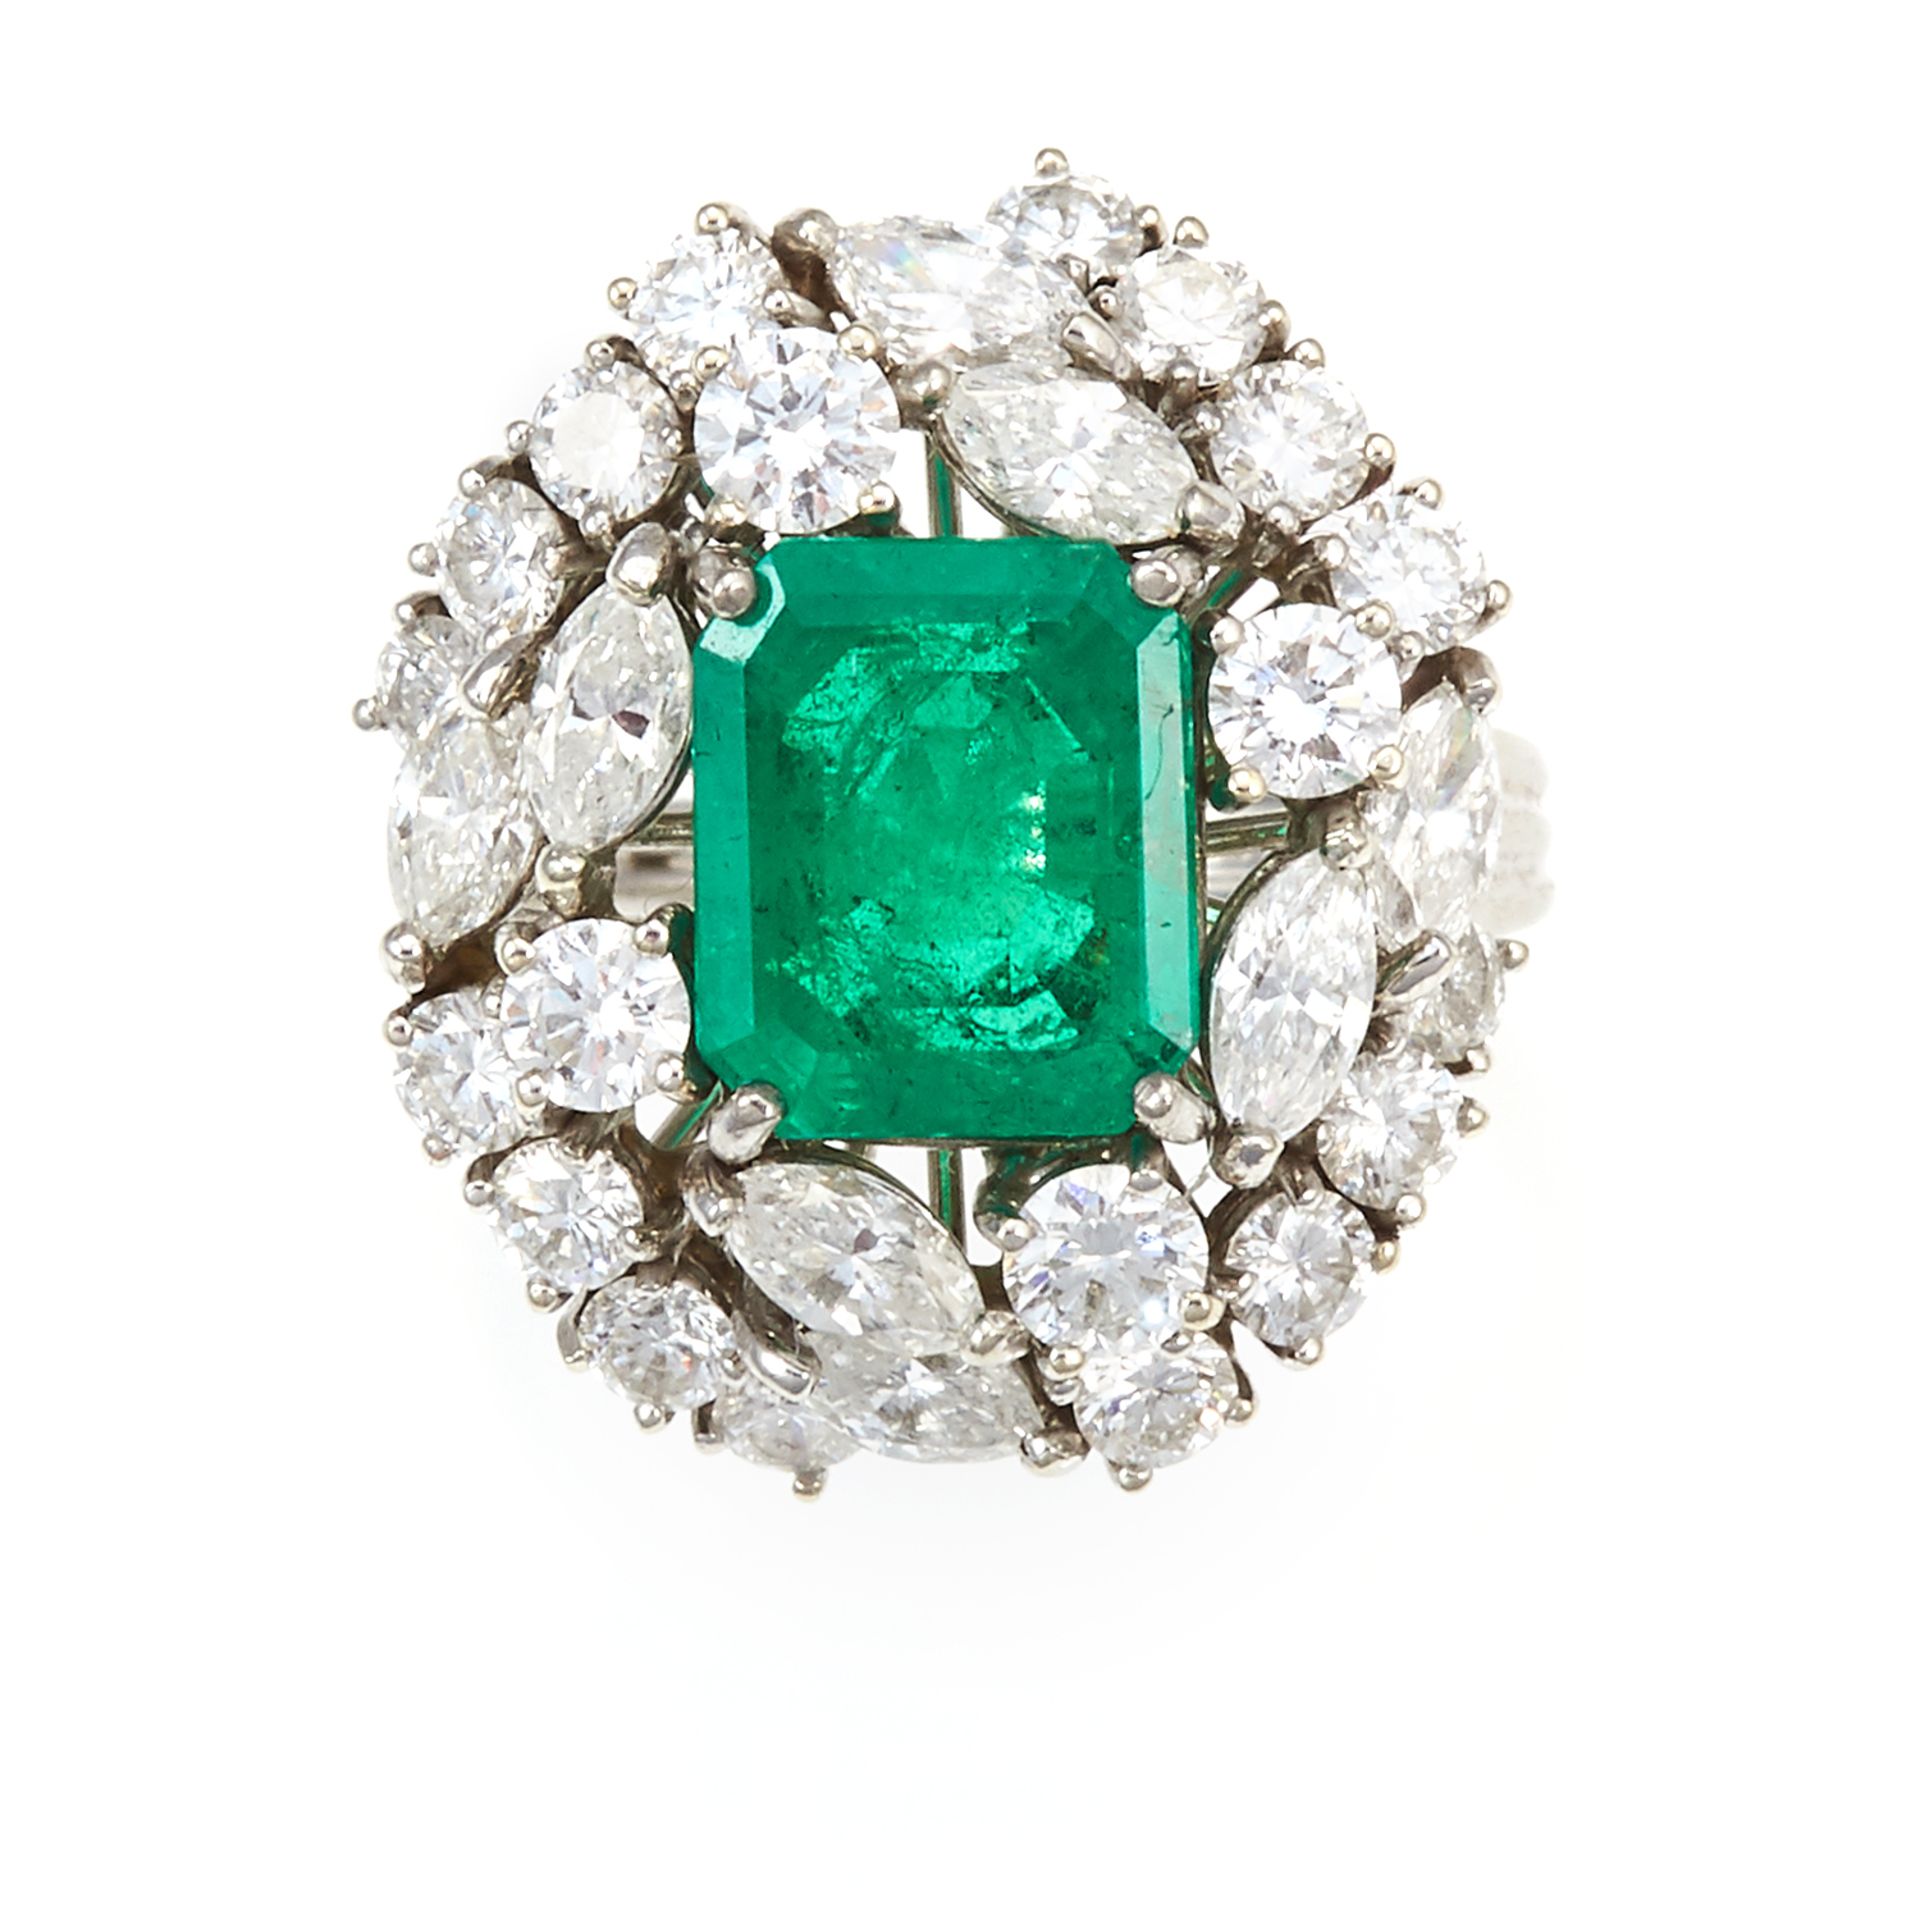 AN EMERALD AND DIAMOND DRESS RING in 18ct white gold, the step cut emerald of 3.25 carats